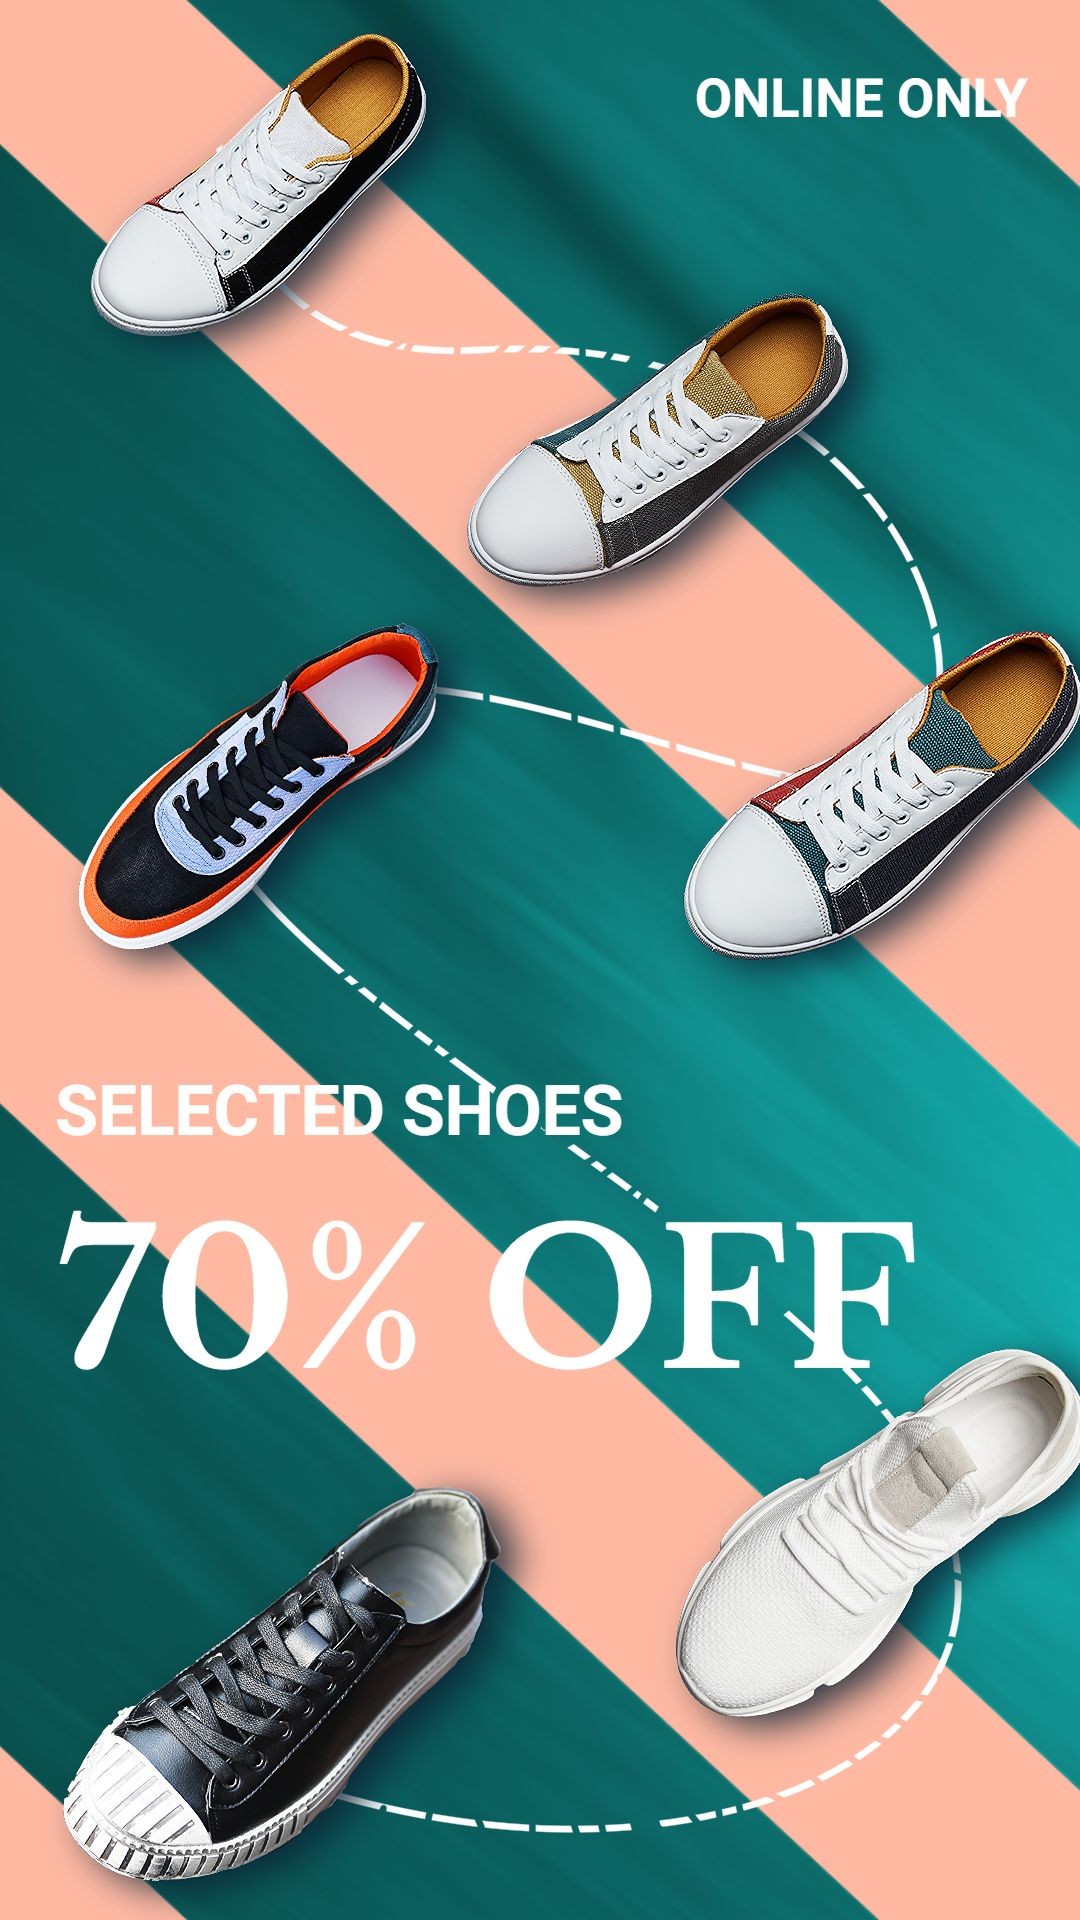 Sneakers and Canvas Shoes Fashion Sale Promo Ecommerce Story预览效果